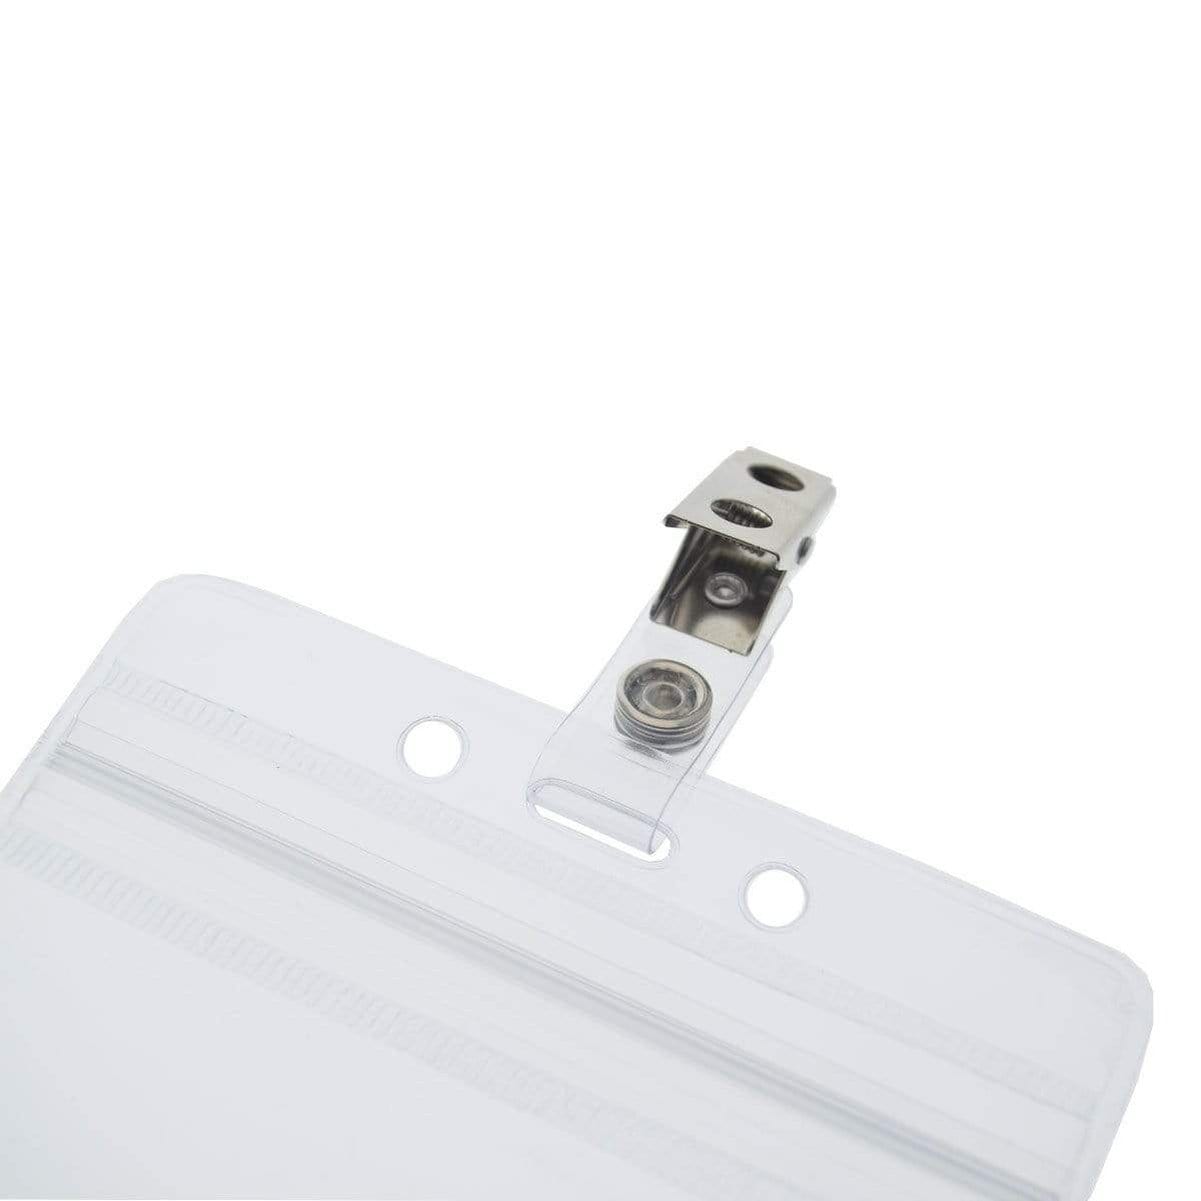 Clear plastic badge holder with a metal clip attached at the top. The ID Badge Strap Clips (Industry Standard Clip), featuring two holes and a secure zipper closure, is perfect for use with ID badge clips.